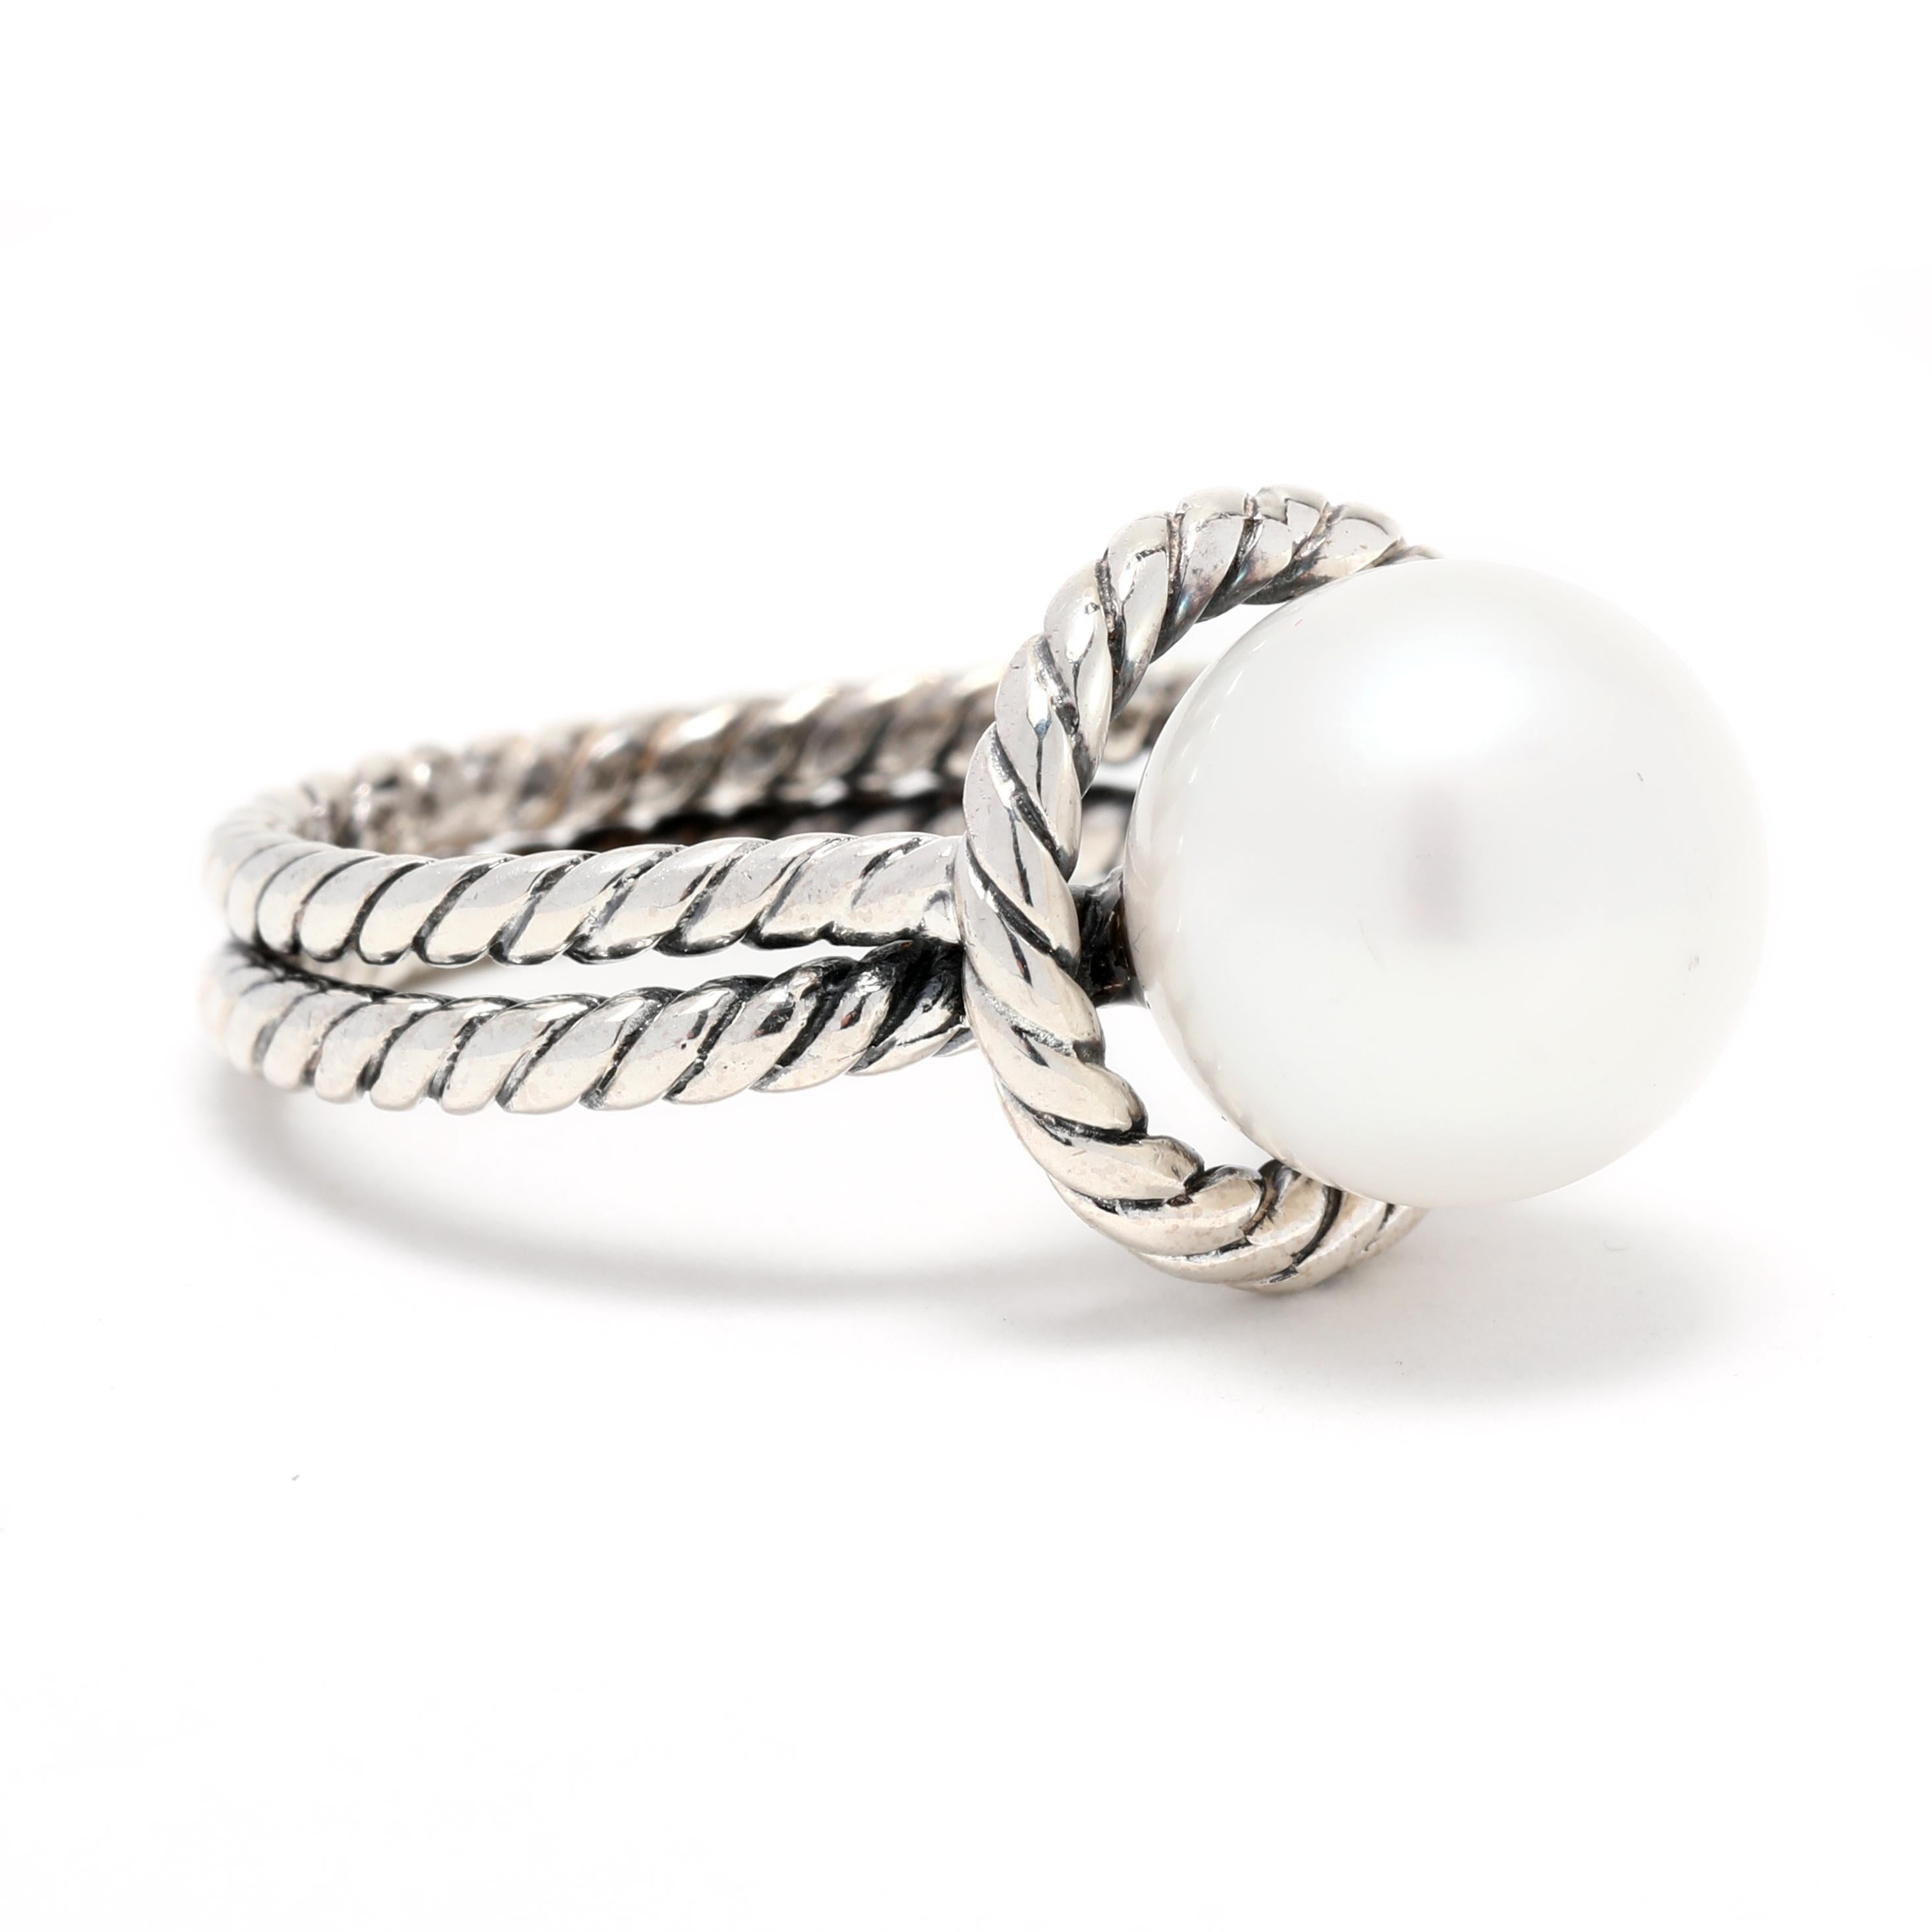 This classic David Yurman Cable Classics Pearl Cocktail Ring is the perfect way to add a touch of sophistication to any outfit. Crafted from sterling silver with a ring size 5.75, this simple yet elegant ring features a large round pearl that is